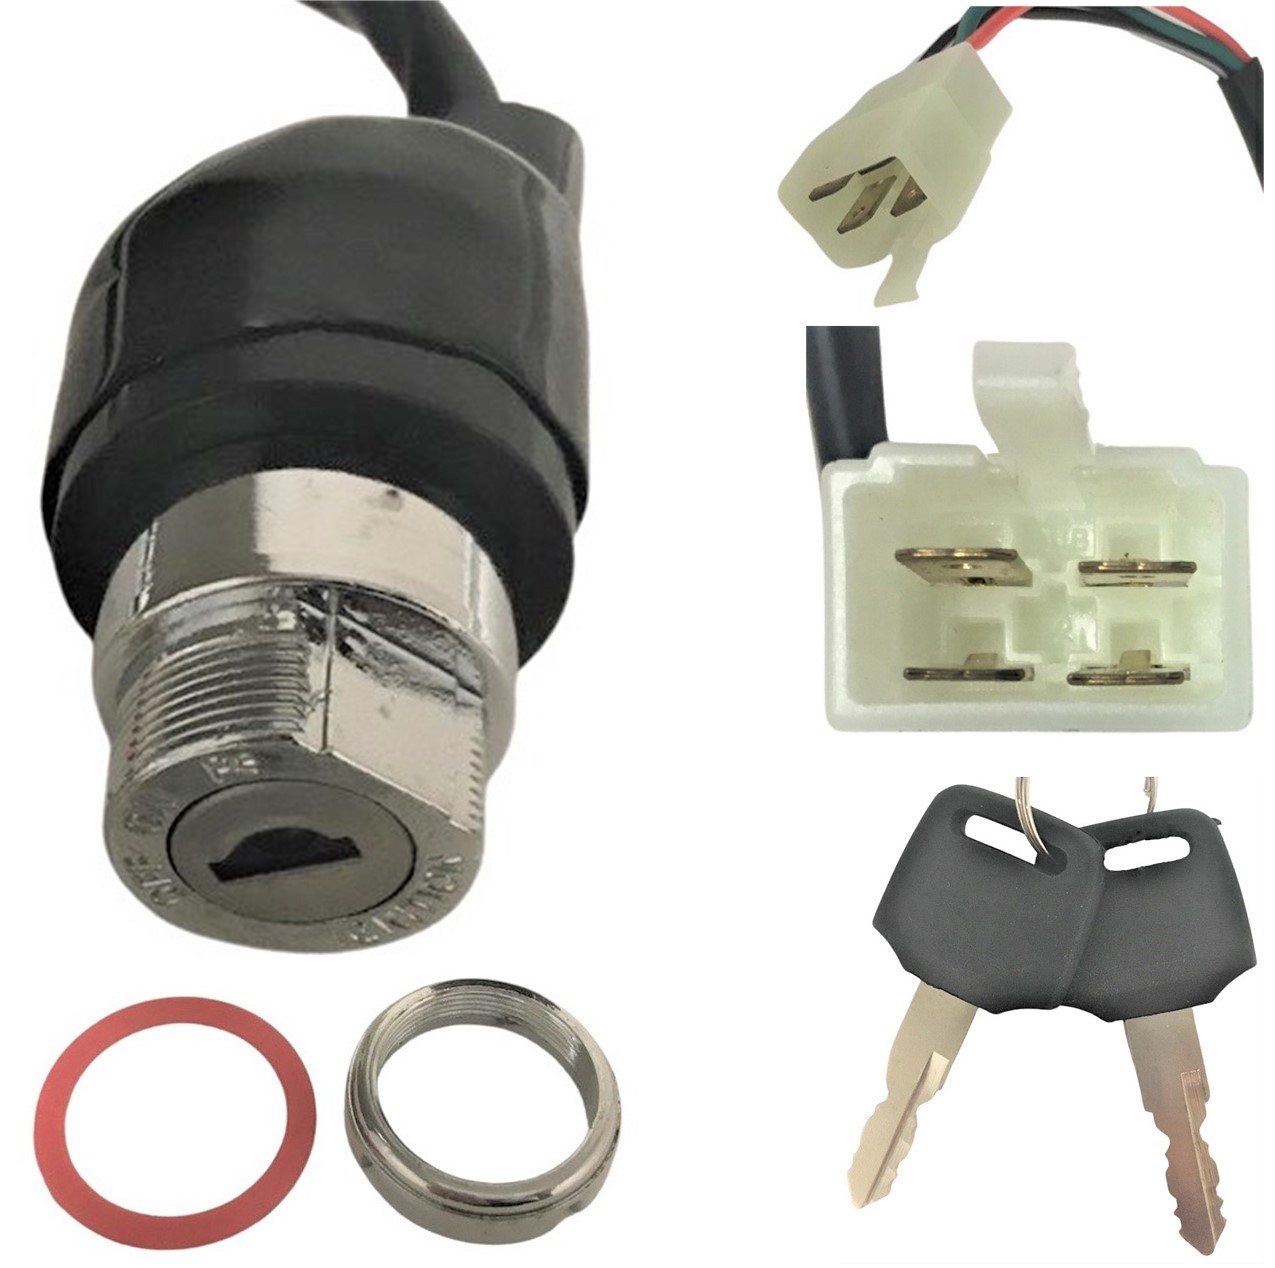 Ignition Switch Fits Many UTVs & ATVs 4 Pins in 4 Pin Female Jack - Click Image to Close